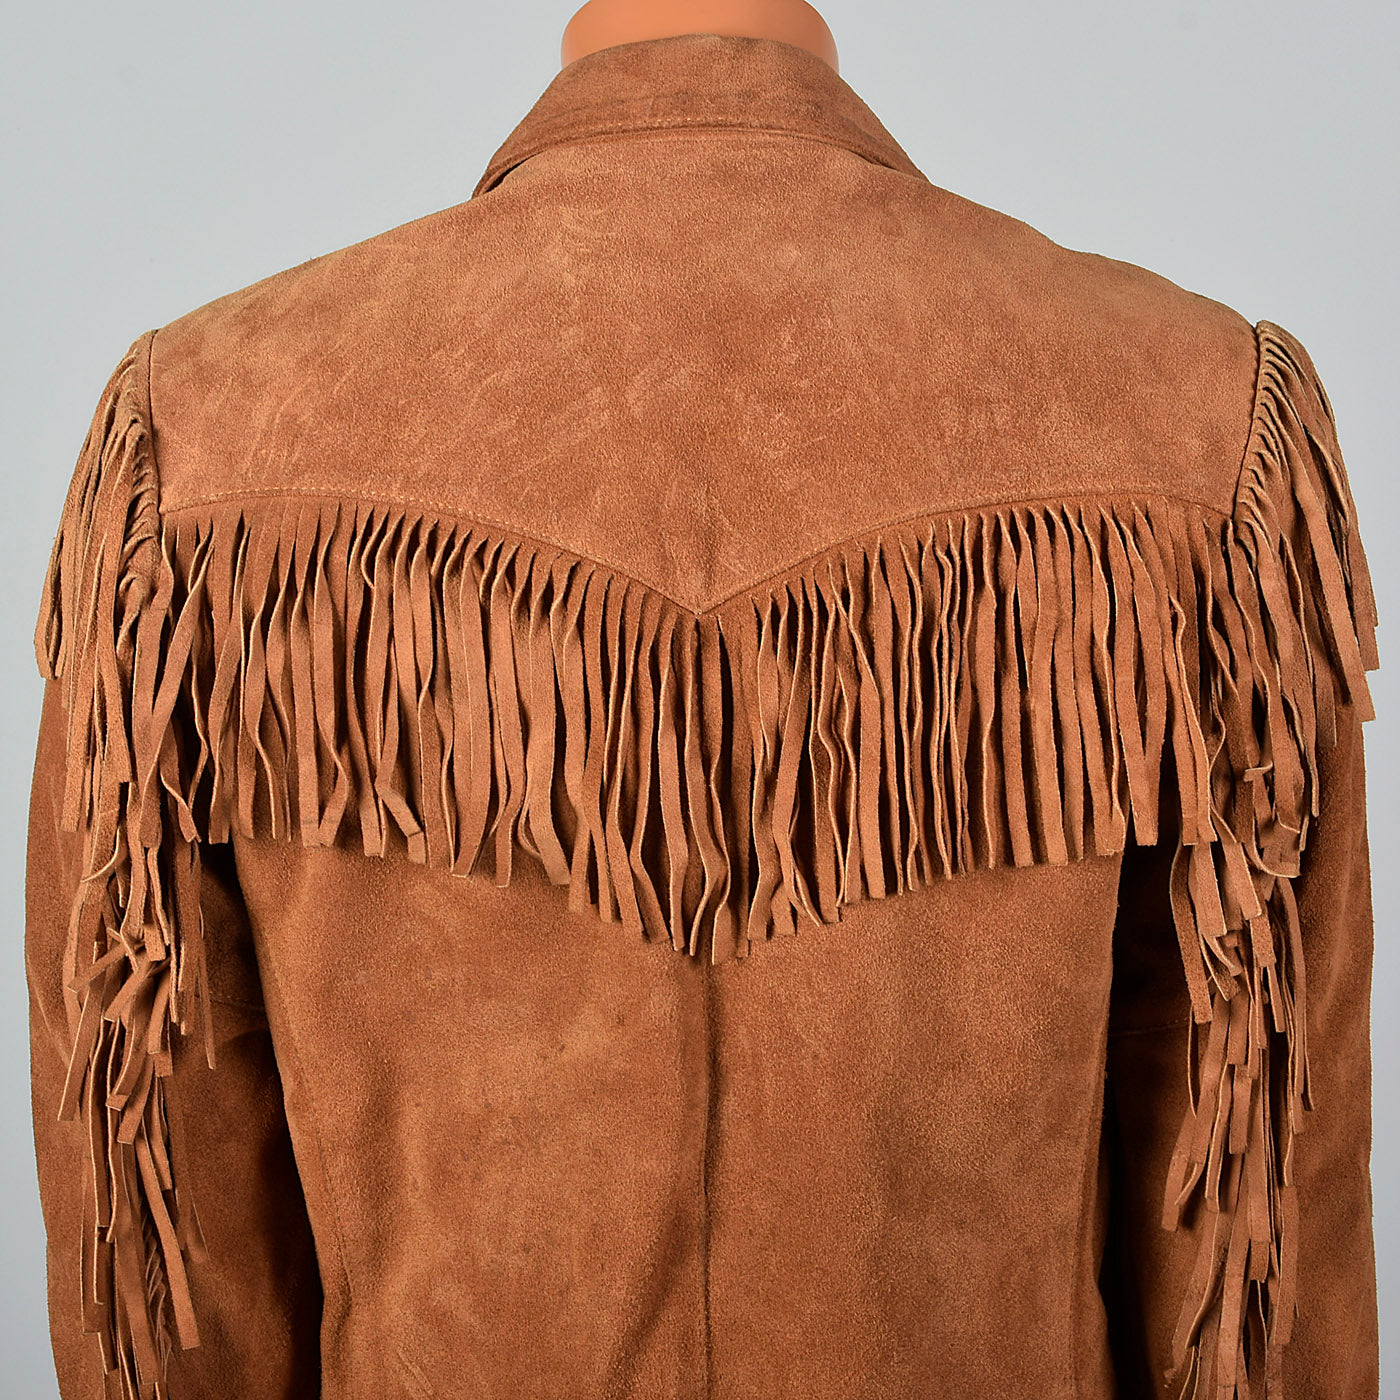 1970s Mens Brown Leather Bohemian Jacket with Fringe Trim